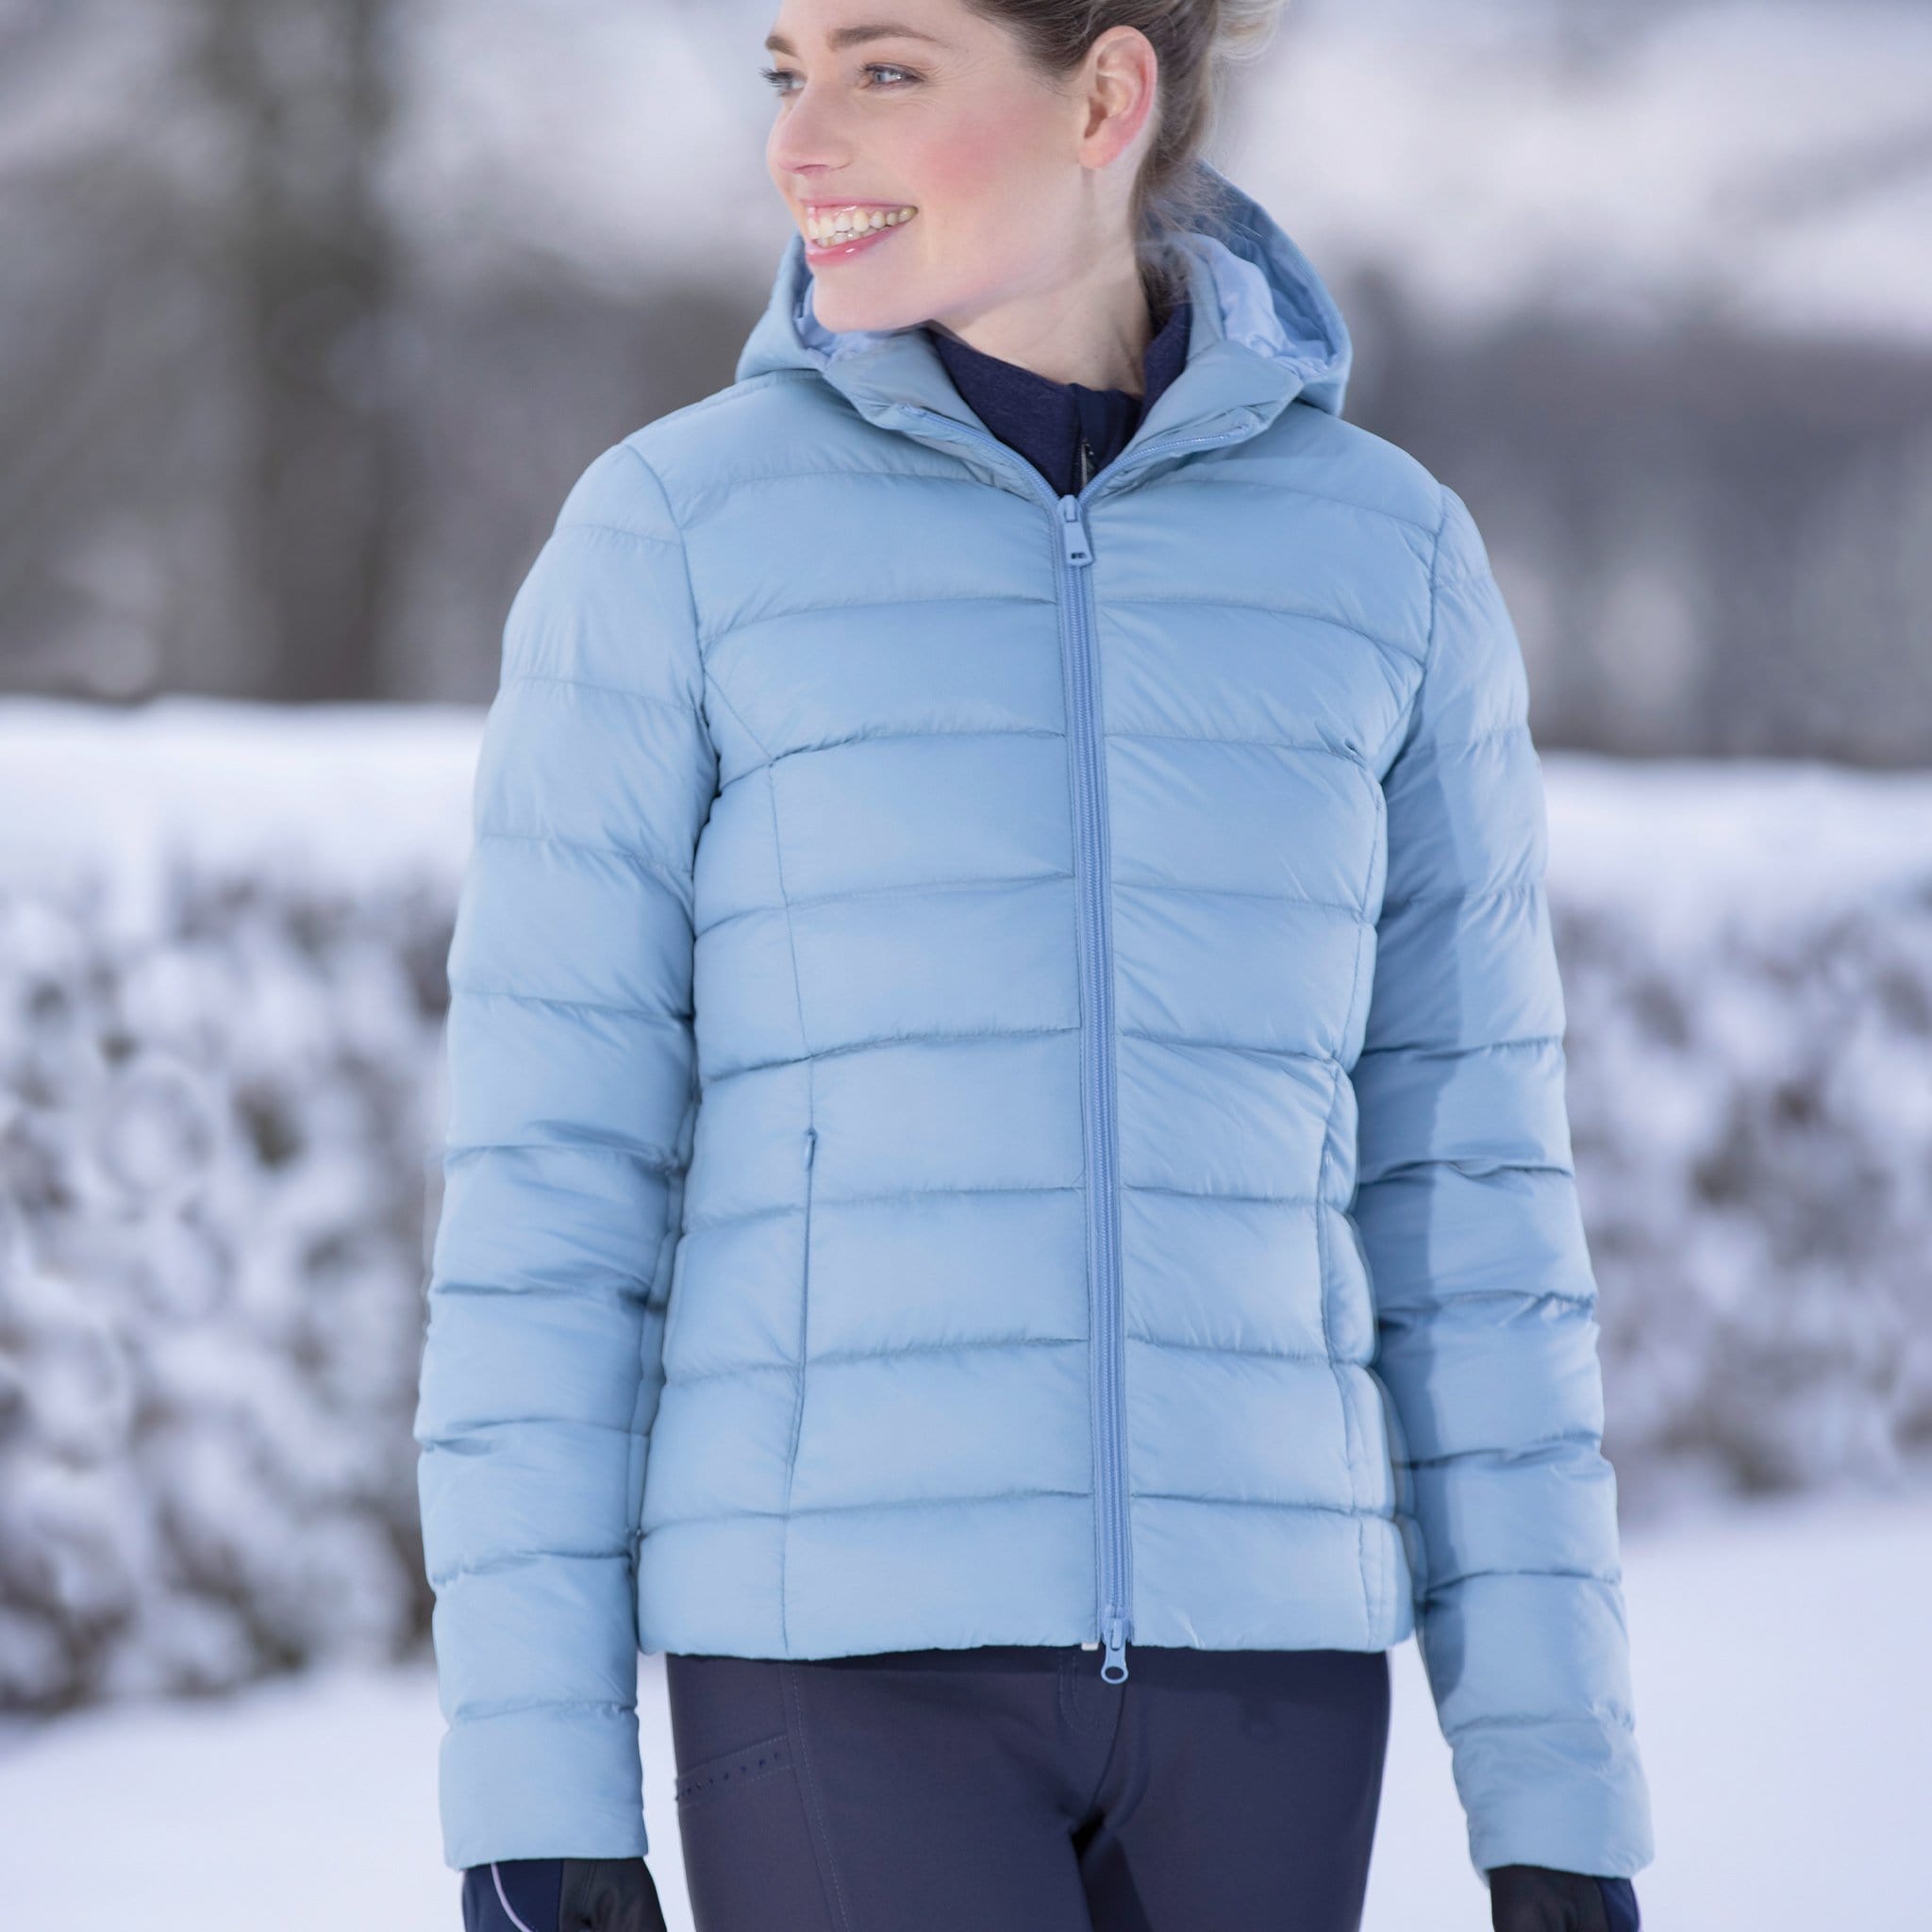 HKM Lena Quilted Jacket 12577 Ice Blue Front On Model In Snow